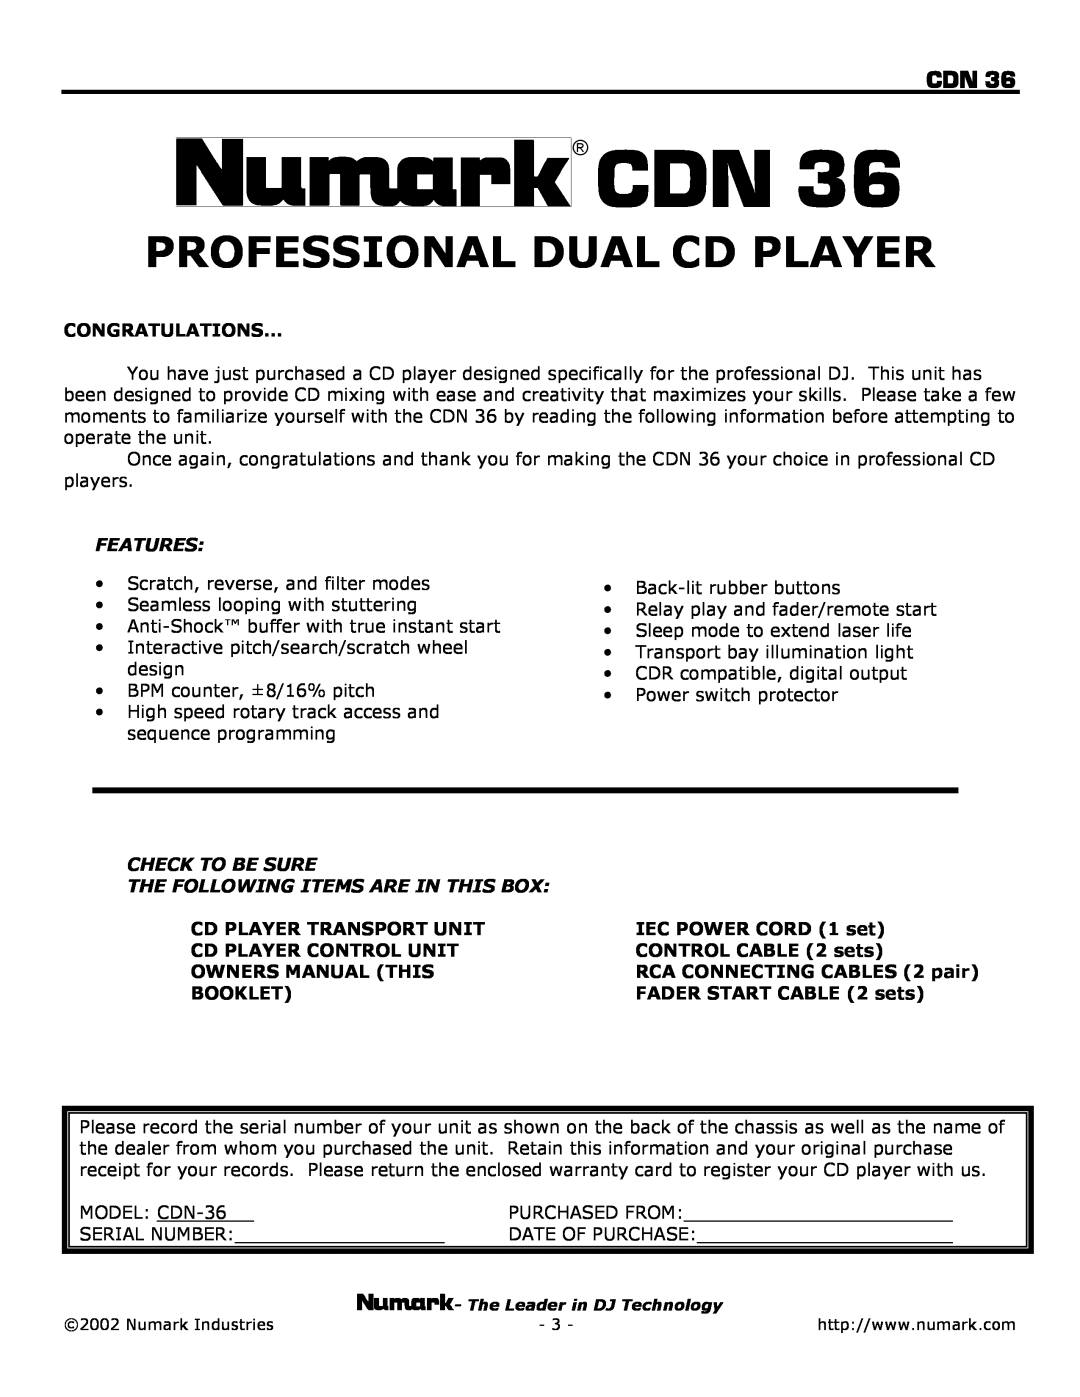 Numark Industries CDN 36 owner manual Professional Dual Cd Player, Congratulations, Features, Check To Be Sure 